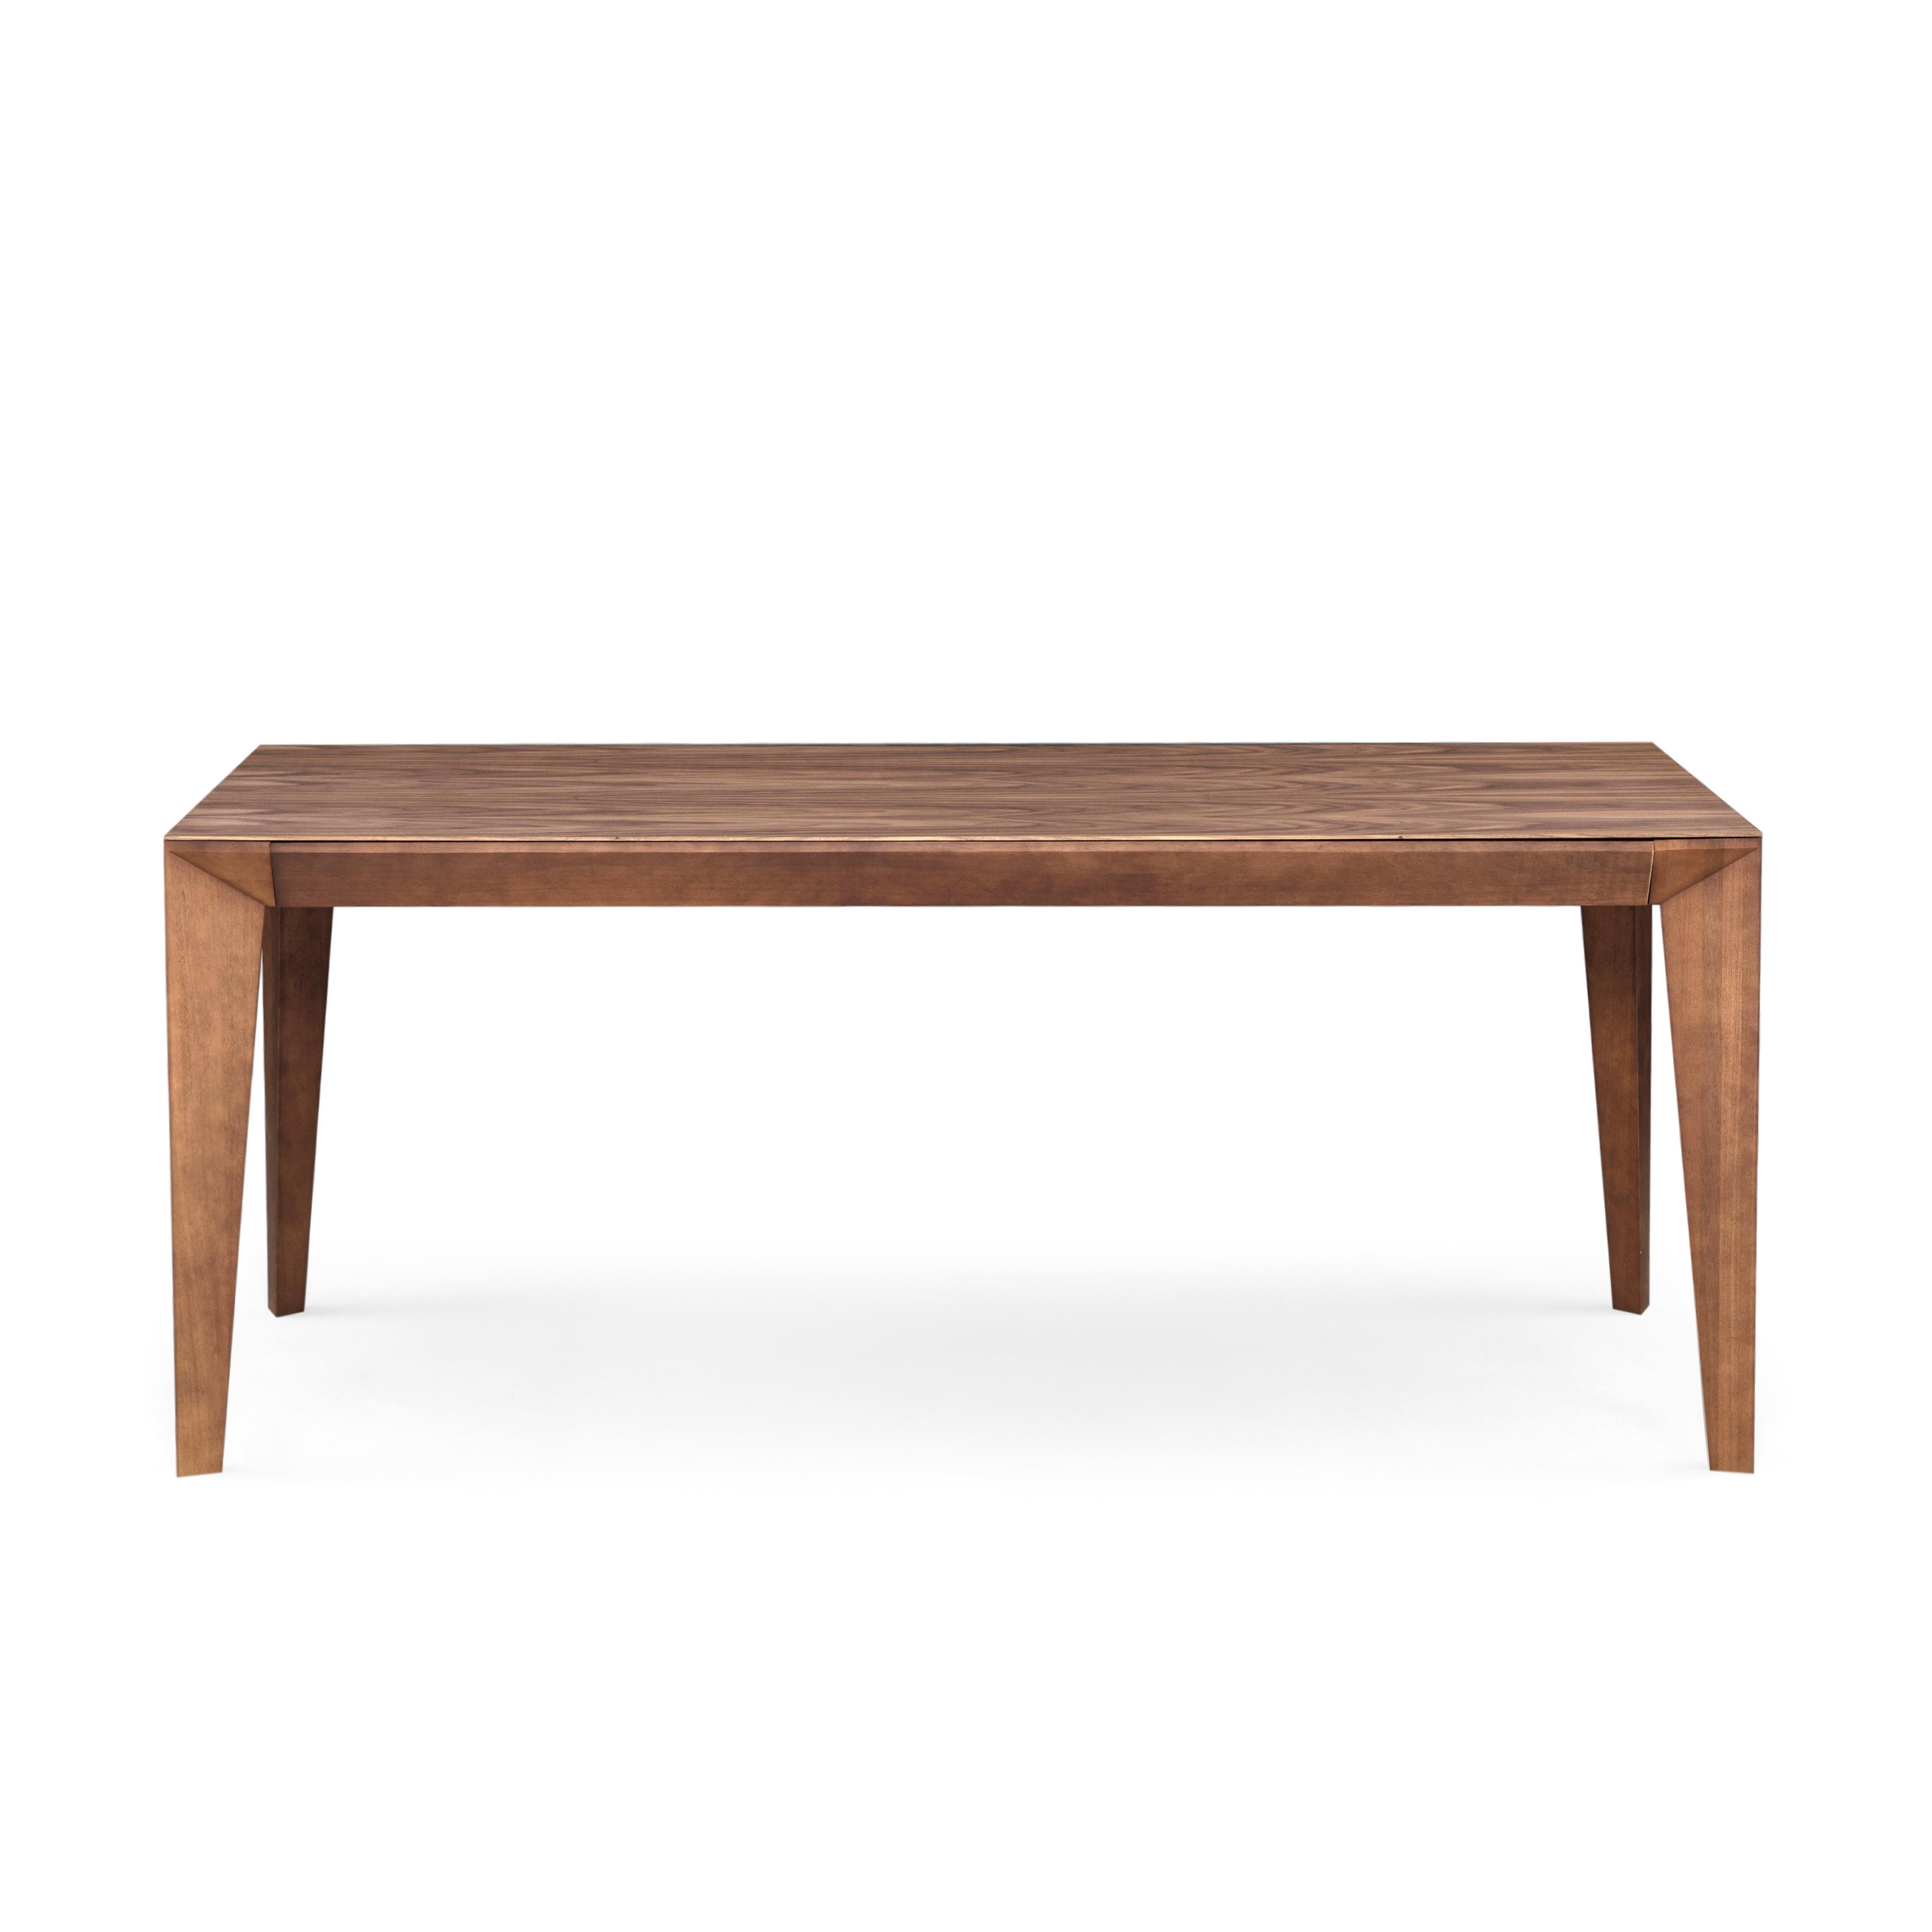 Brazilian Luce Rectangular Dining Table with a Walnut Wood Veneered Table Top 71'' For Sale